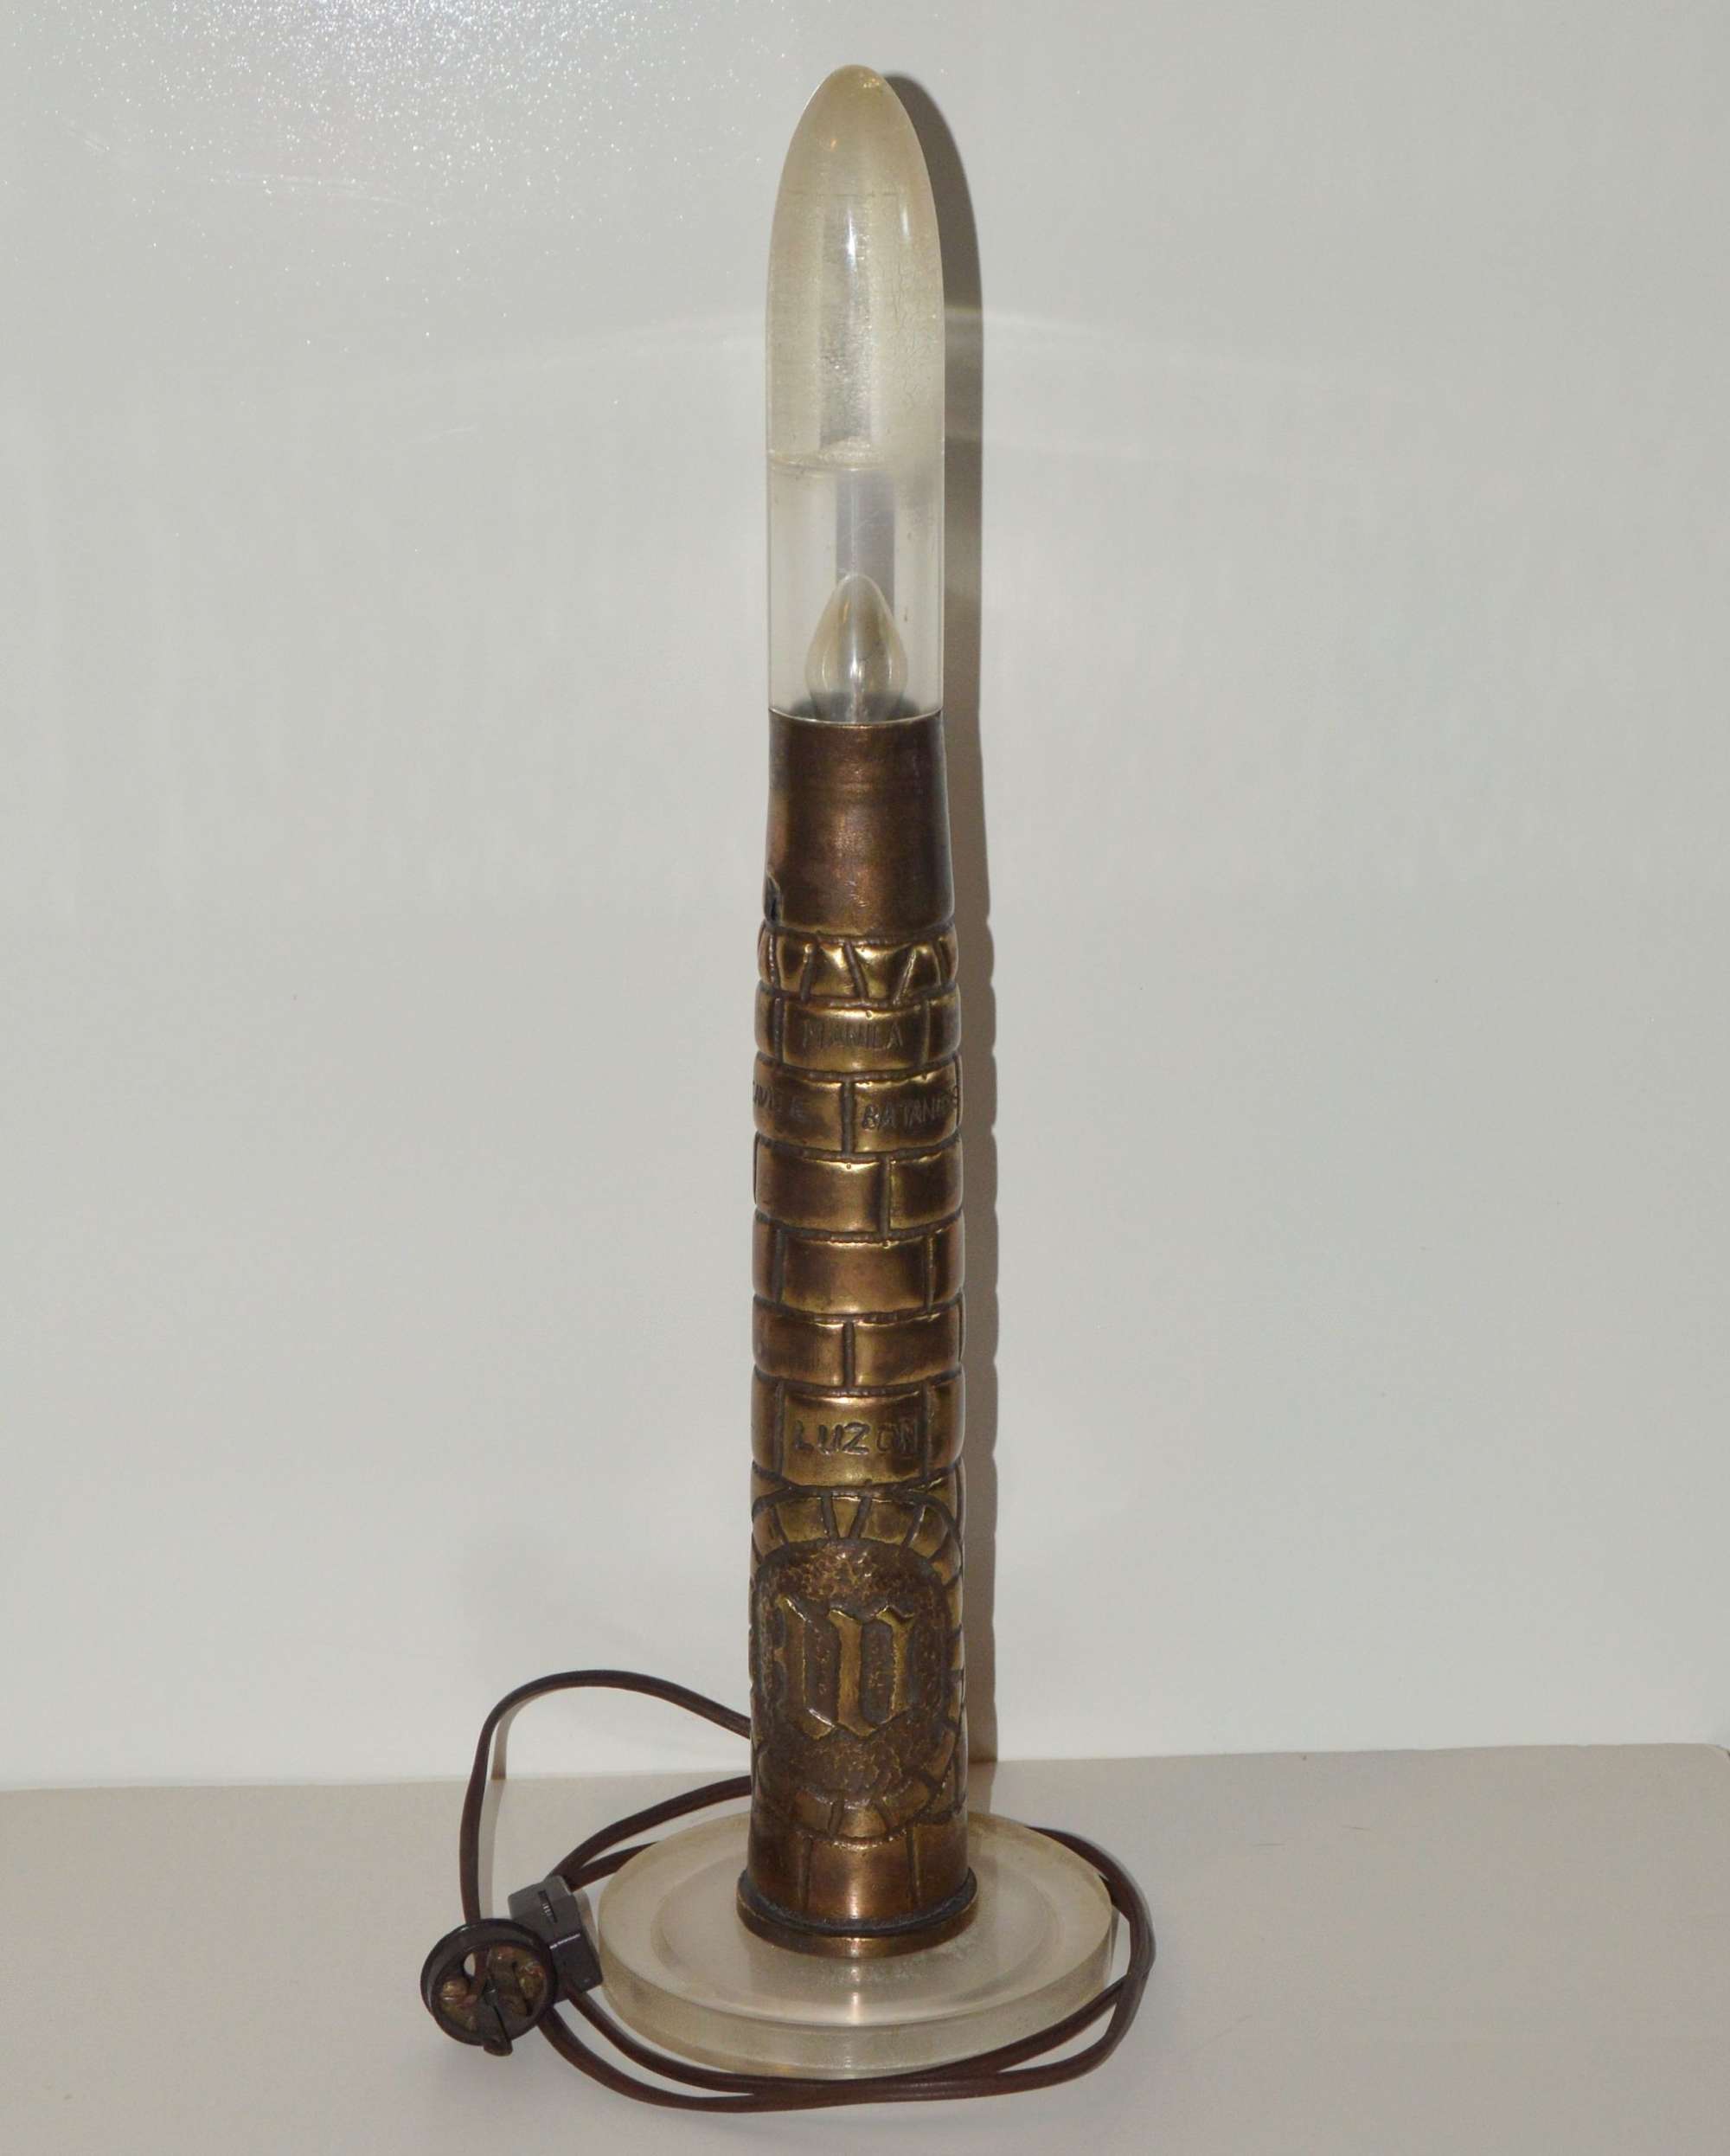 ﻿WWII Phillippines Campaign Trench Art Lamp